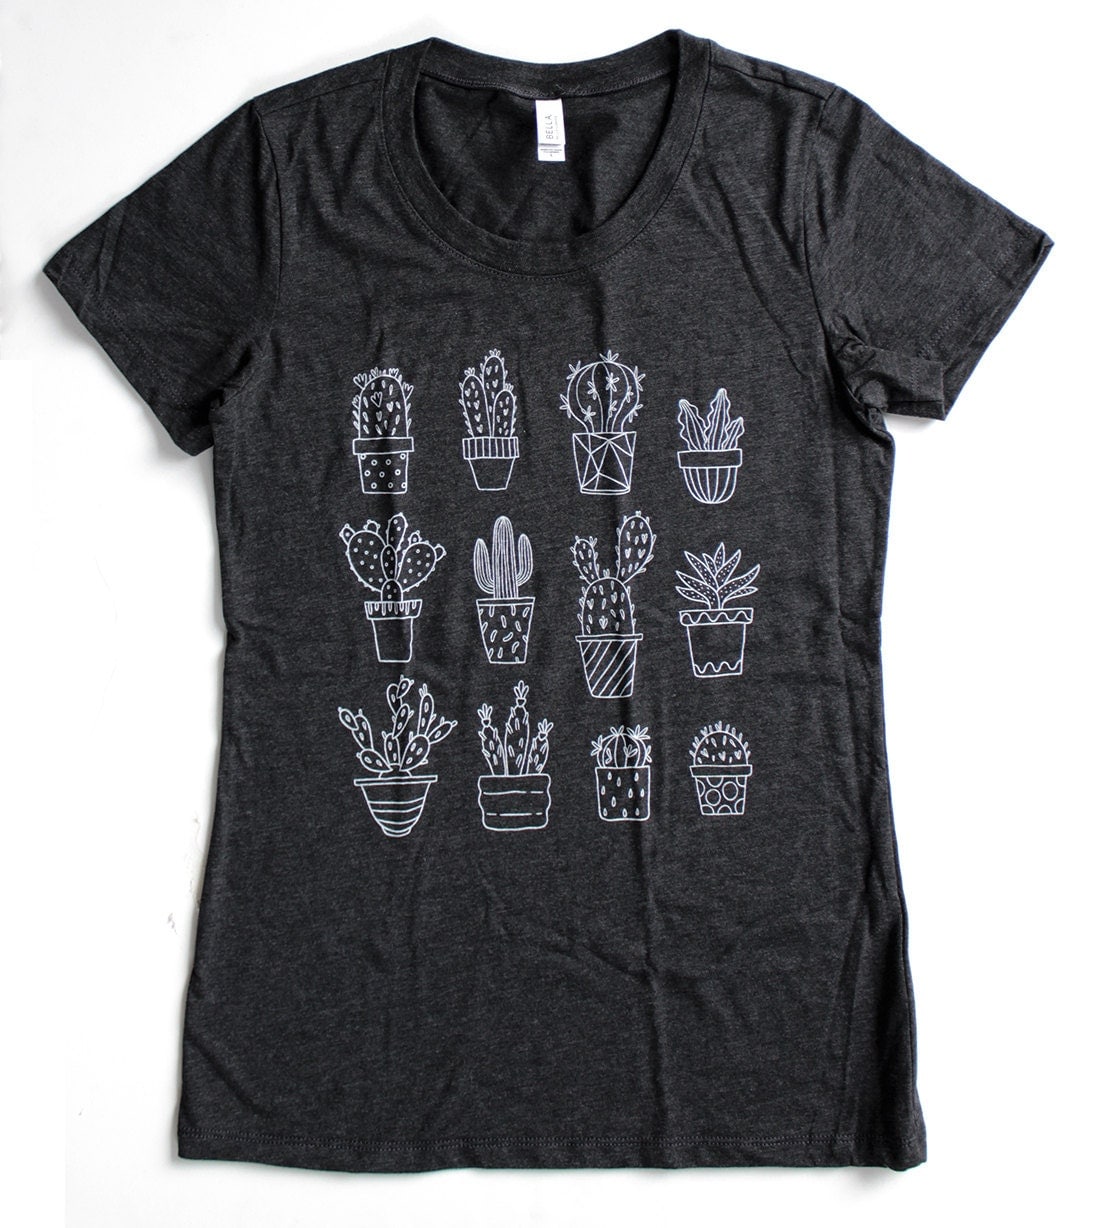 Cactus T Shirt Womens Available in S M L XL and four shirt